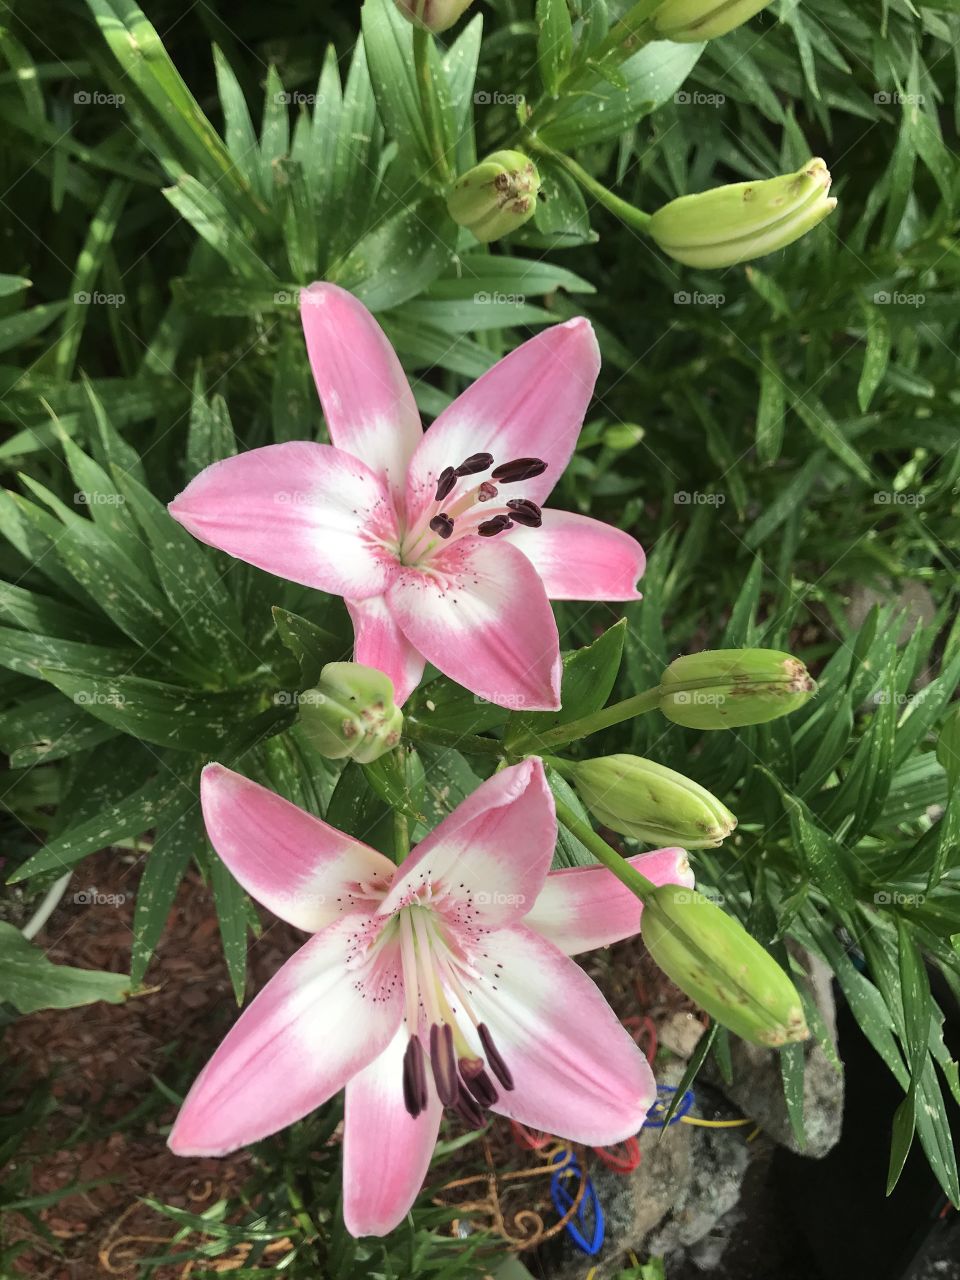 Asiatic lilies in bloom 